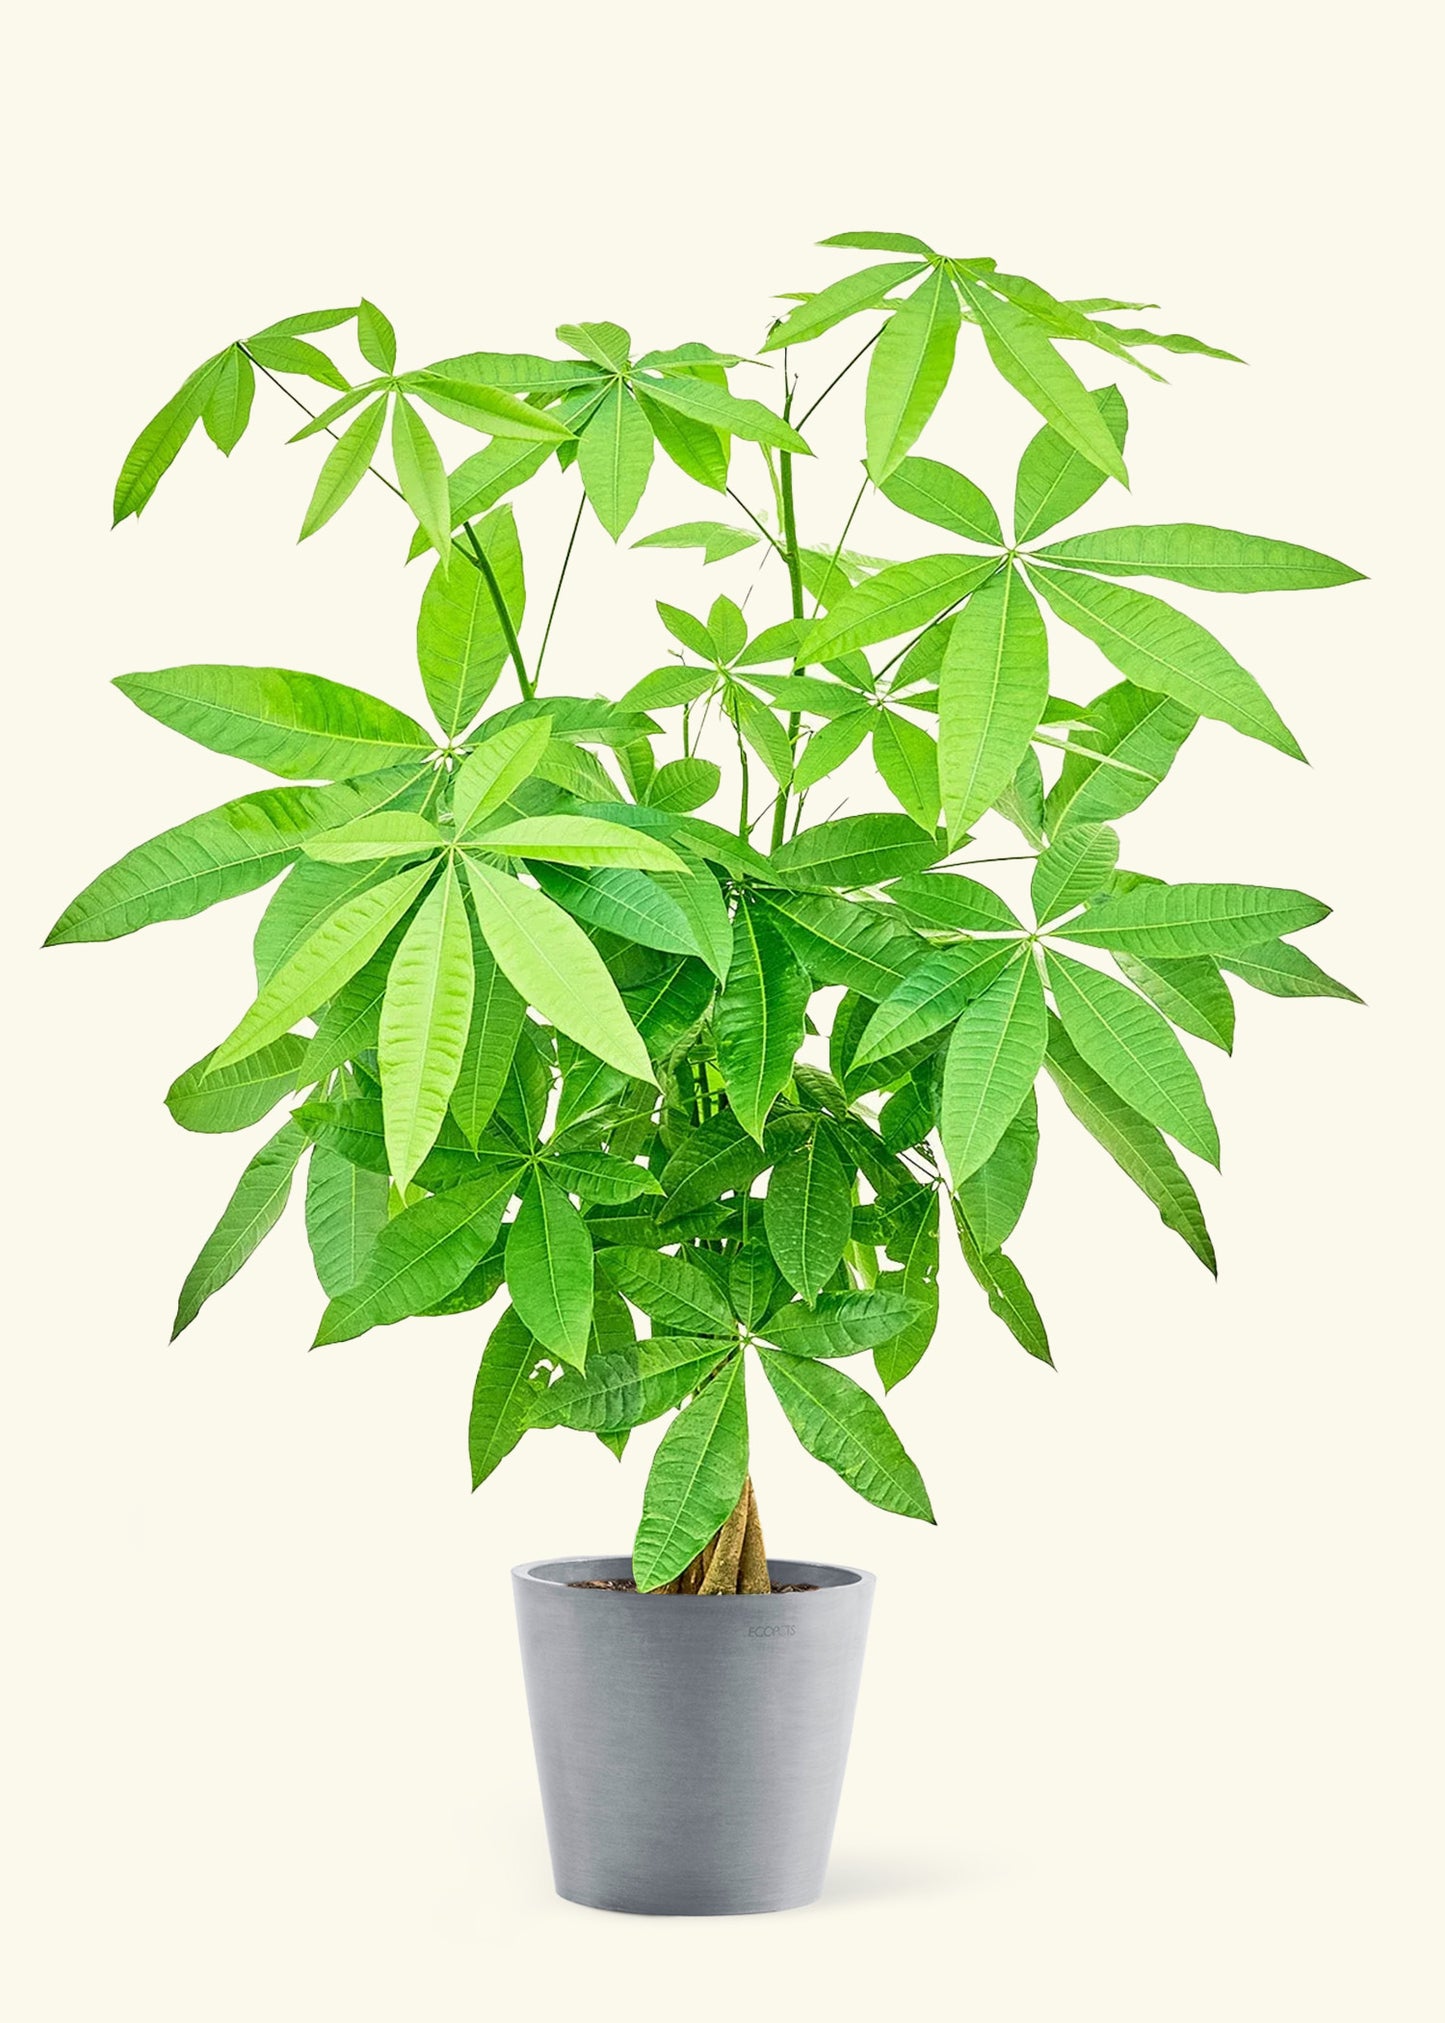 Large Braided Money Tree Plant in a gray stone pot.